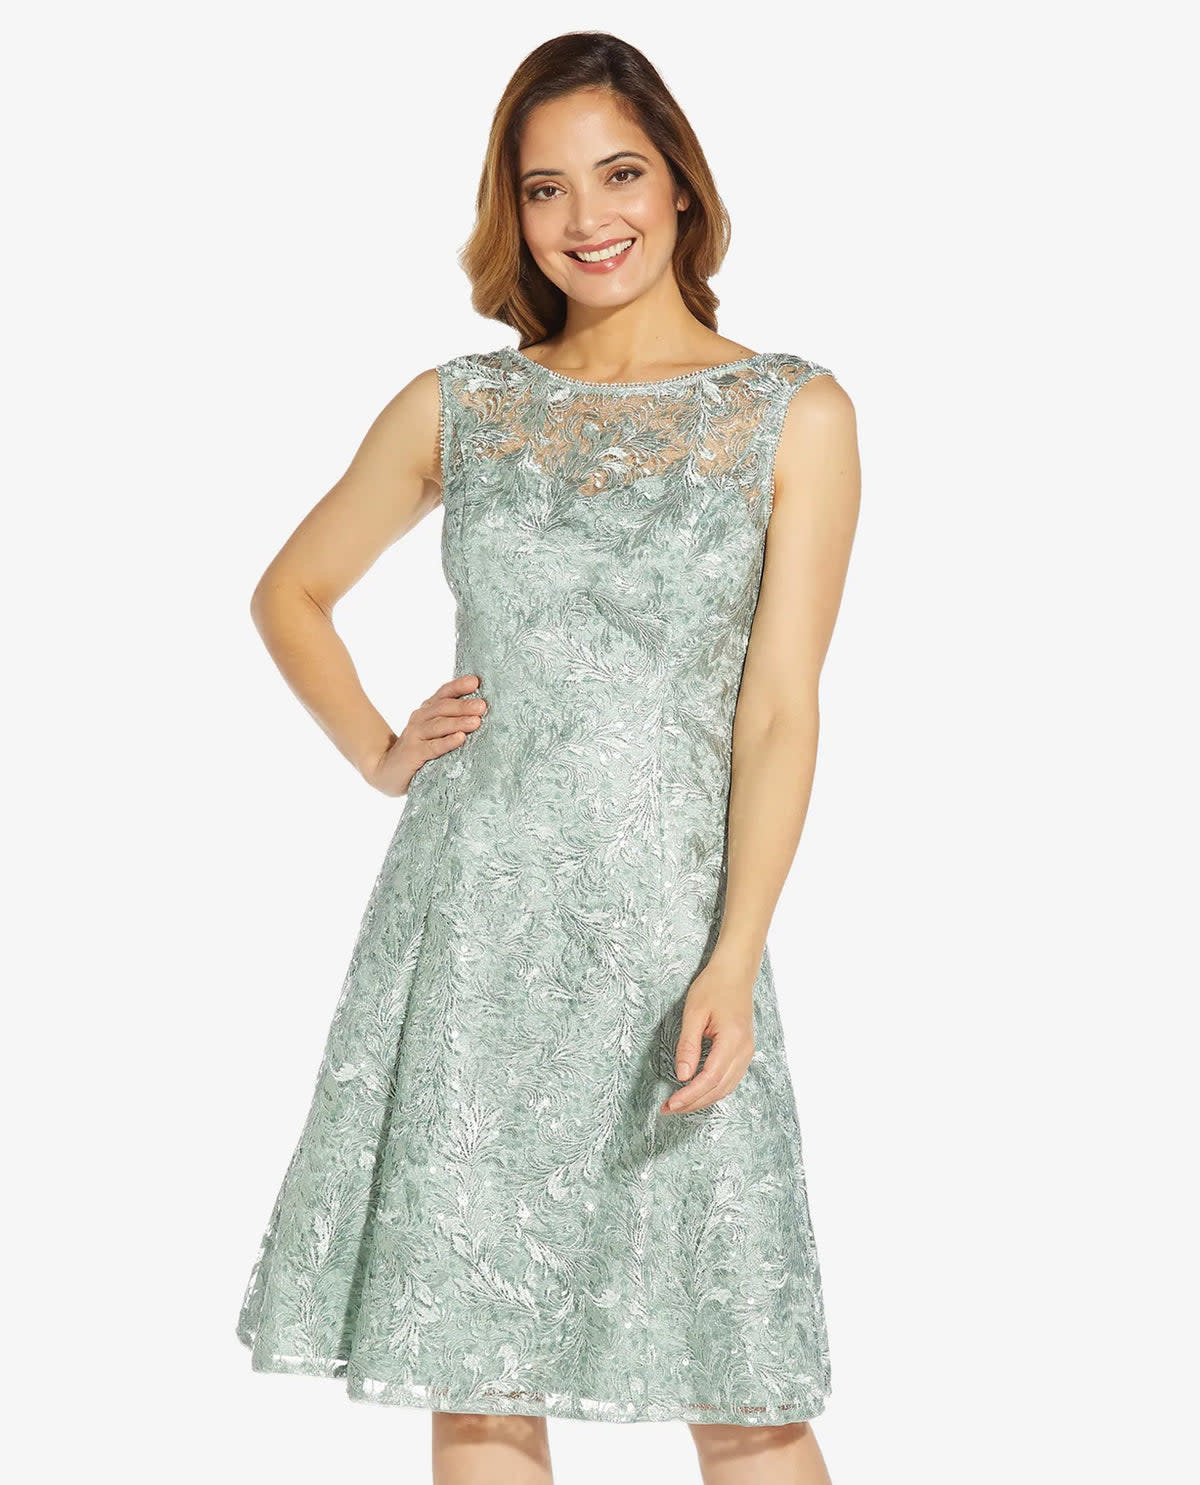 ADRIANNA PAPELL ADRIANNA PAPELL EMBROIDERED MIDI COCKTAIL DRESSES